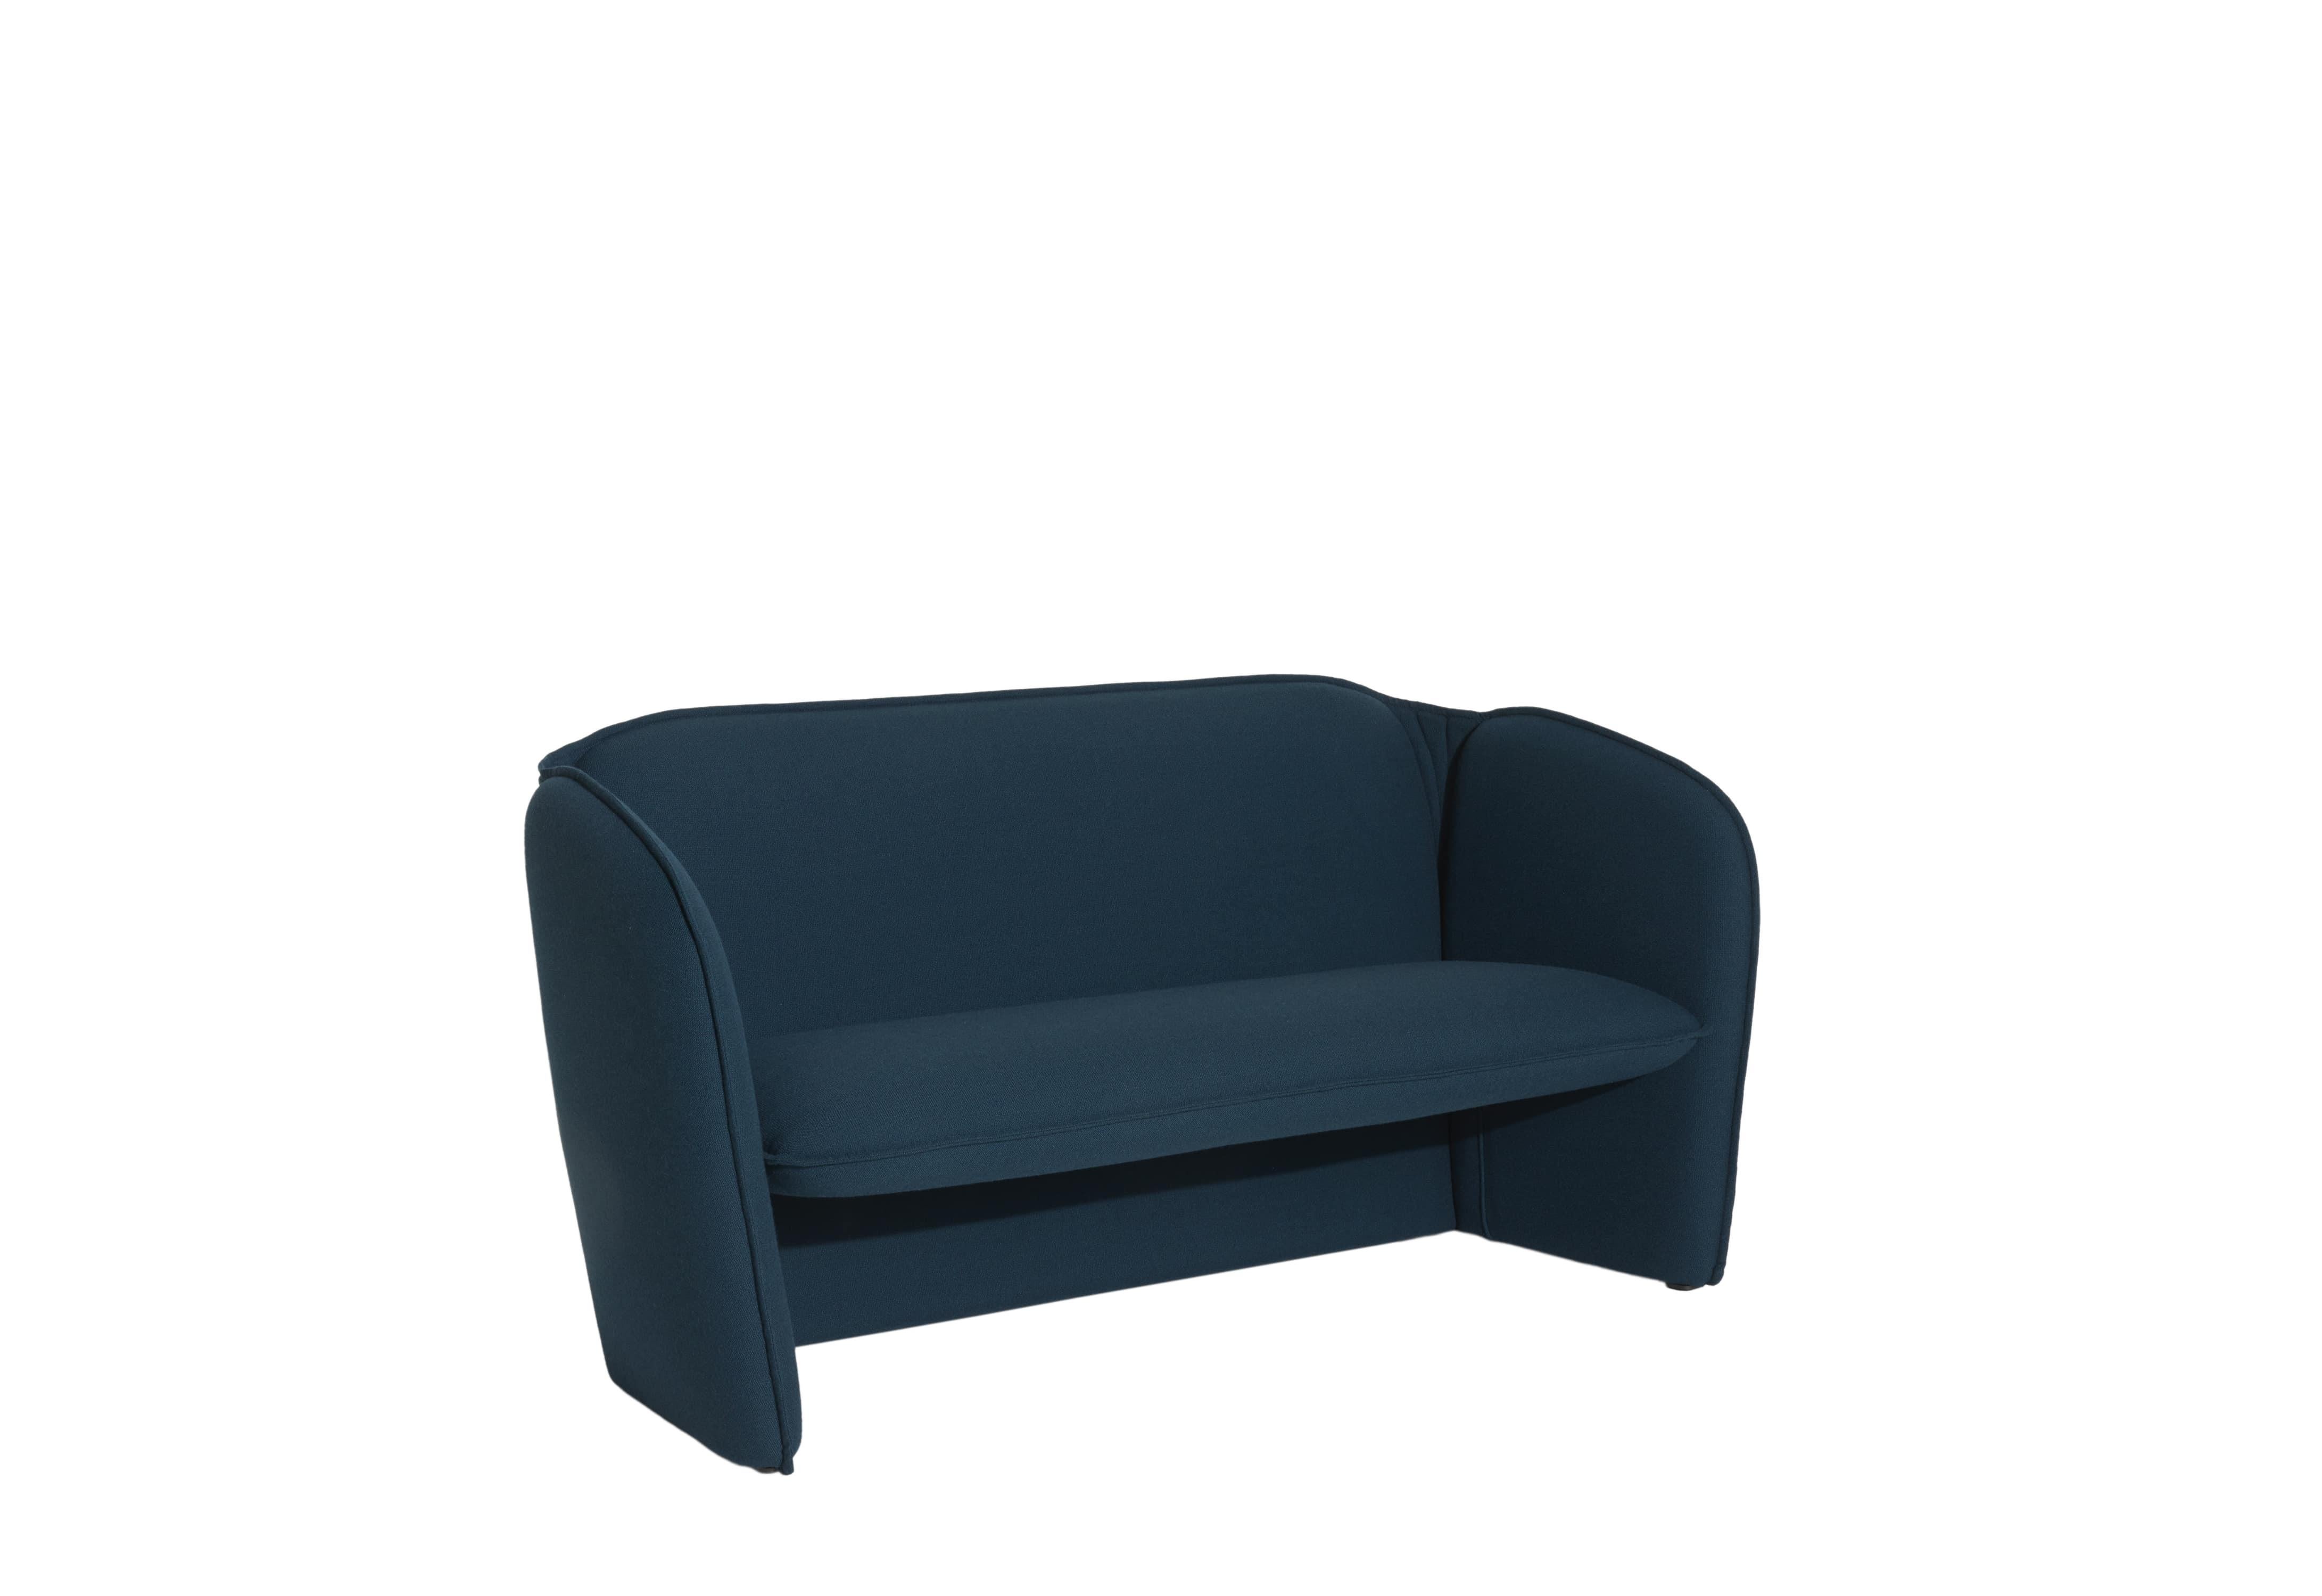 Petite Friture Lily Sofa in Navy Blue by Färg & Blanche, 2022

A comprehensive collection comprising a sofa and armchair. With impeccable, concise proportions, and smooth and organic contours for a hospitable feel.

Established in Stockholm in